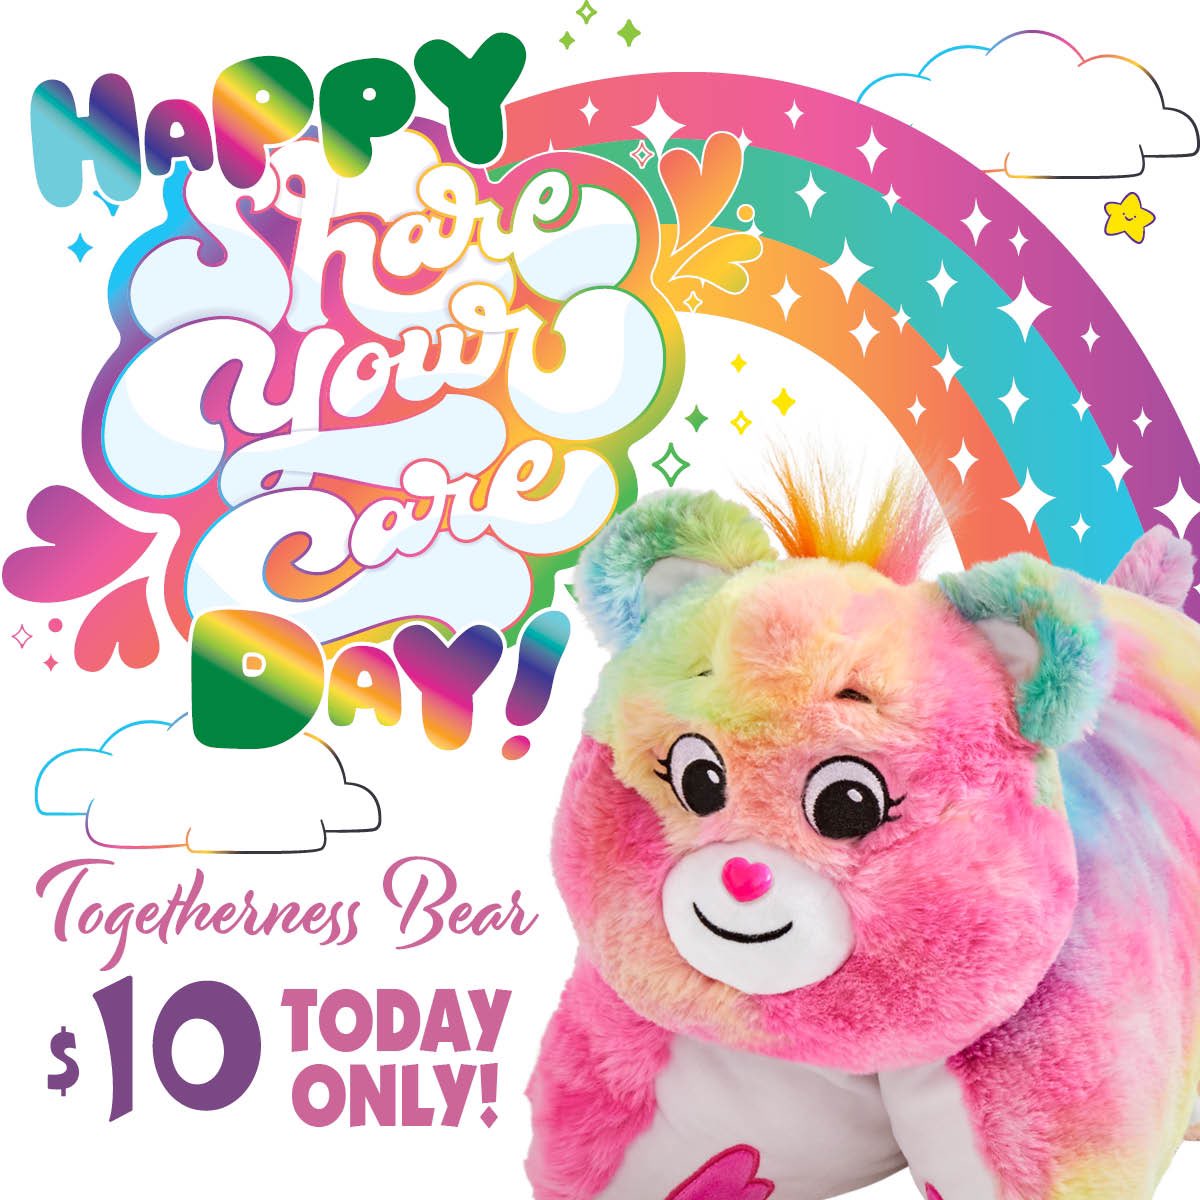 ‼️FLASH SALE‼️Happy Share your Care Day!💗🫶 🌈To celebrate this day dedicated to kindness and compassion, we are offering a one day sale on our Togetherness Bear. 🚨Today only, Togetherness Bear will be $10!🚨 #DaretoCare #ShareYourCare #ShareYourCareDay #CareBears #pillowpets